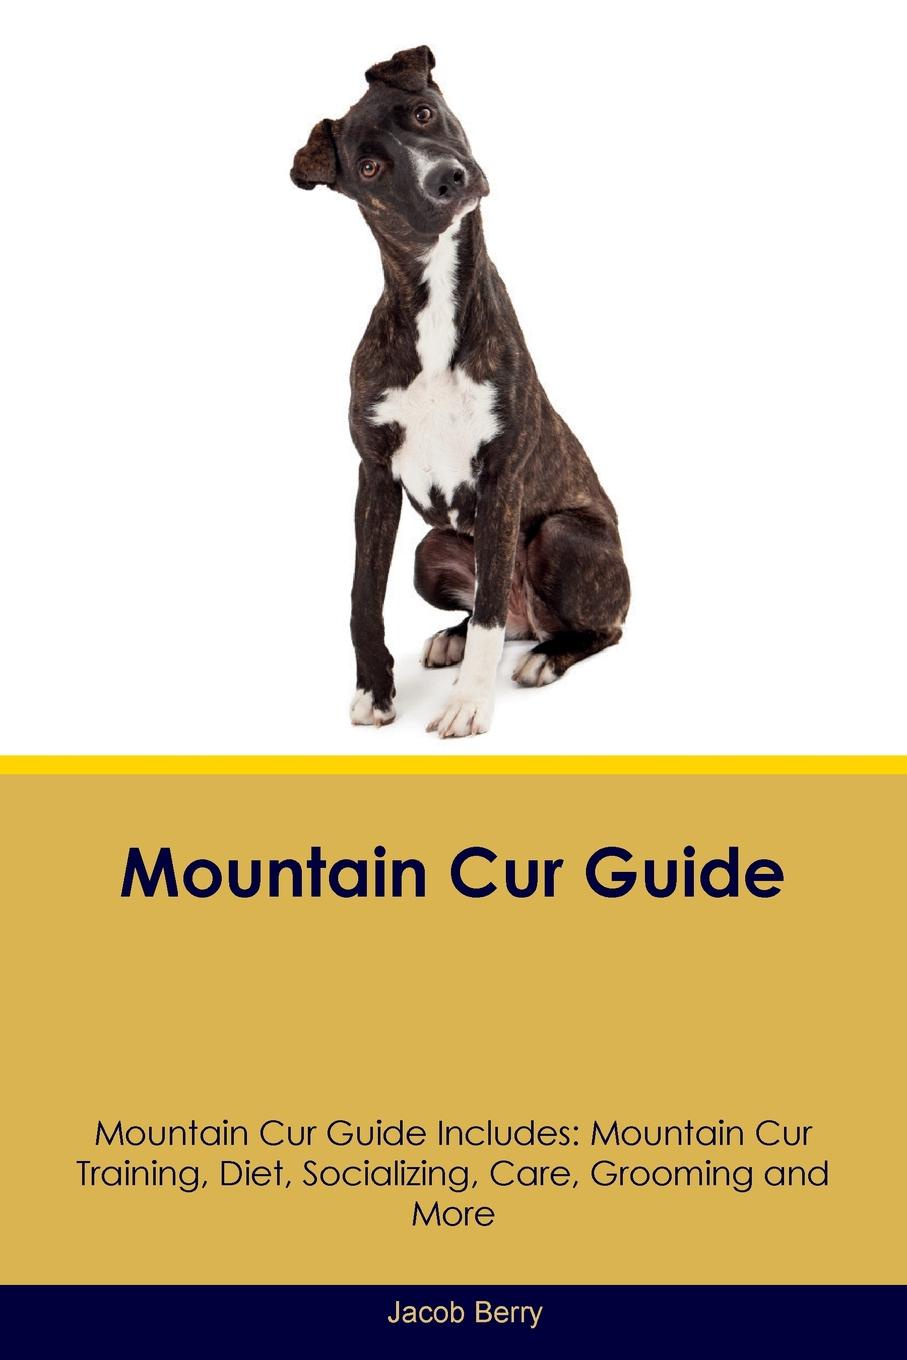 Mountain Cur Guide Mountain Cur Guide Includes. Mountain Cur Training, Diet, Socializing, Care, Grooming, Breeding and More